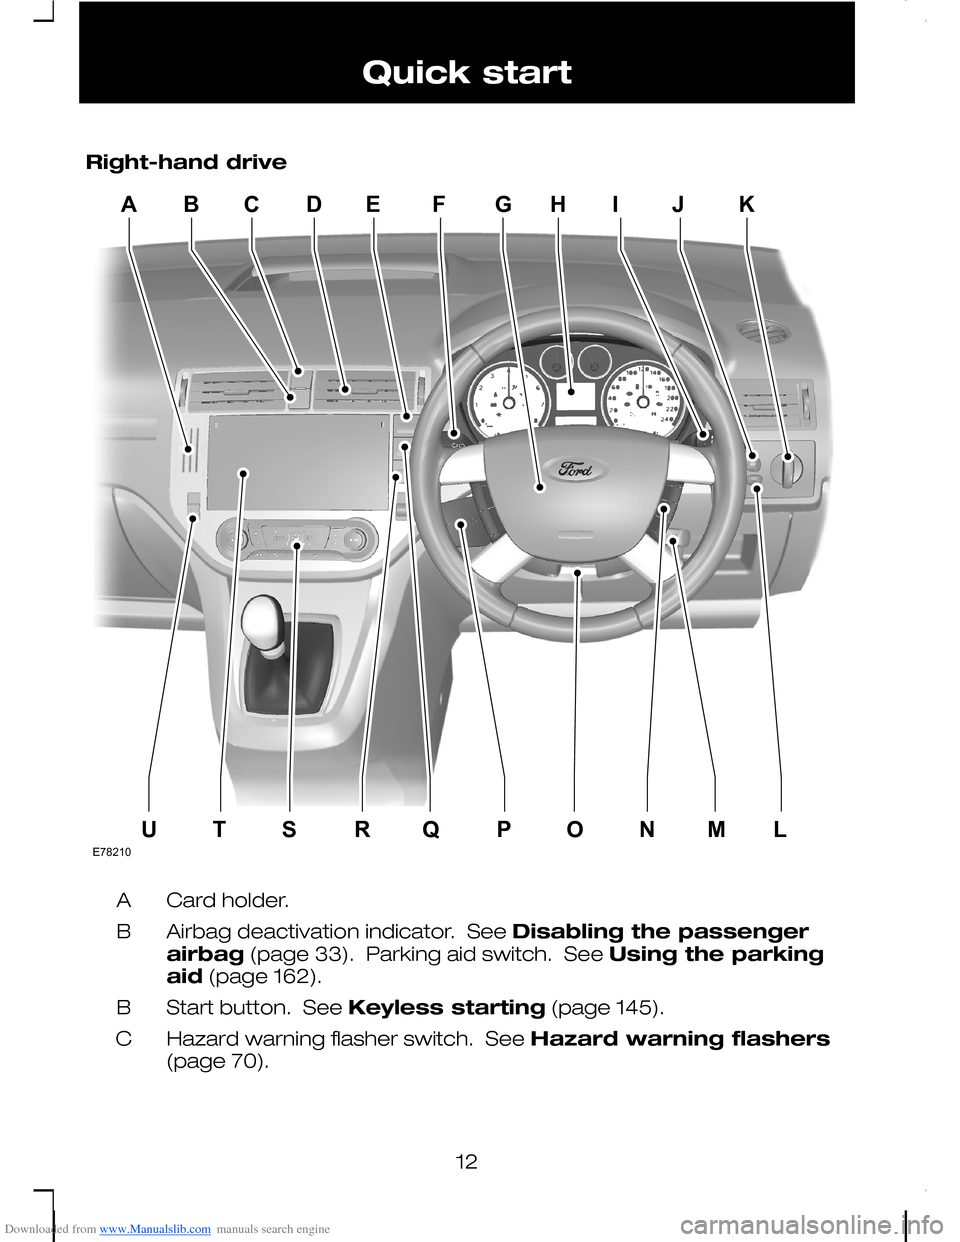 FORD C MAX 2008 1.G User Guide Downloaded from www.Manualslib.com manuals search engine Right-hand drive
Card holder.A
Airbag deactivation indicator.  See Disabling the passengerairbag (page 33).  Parking aid switch.  See Using the